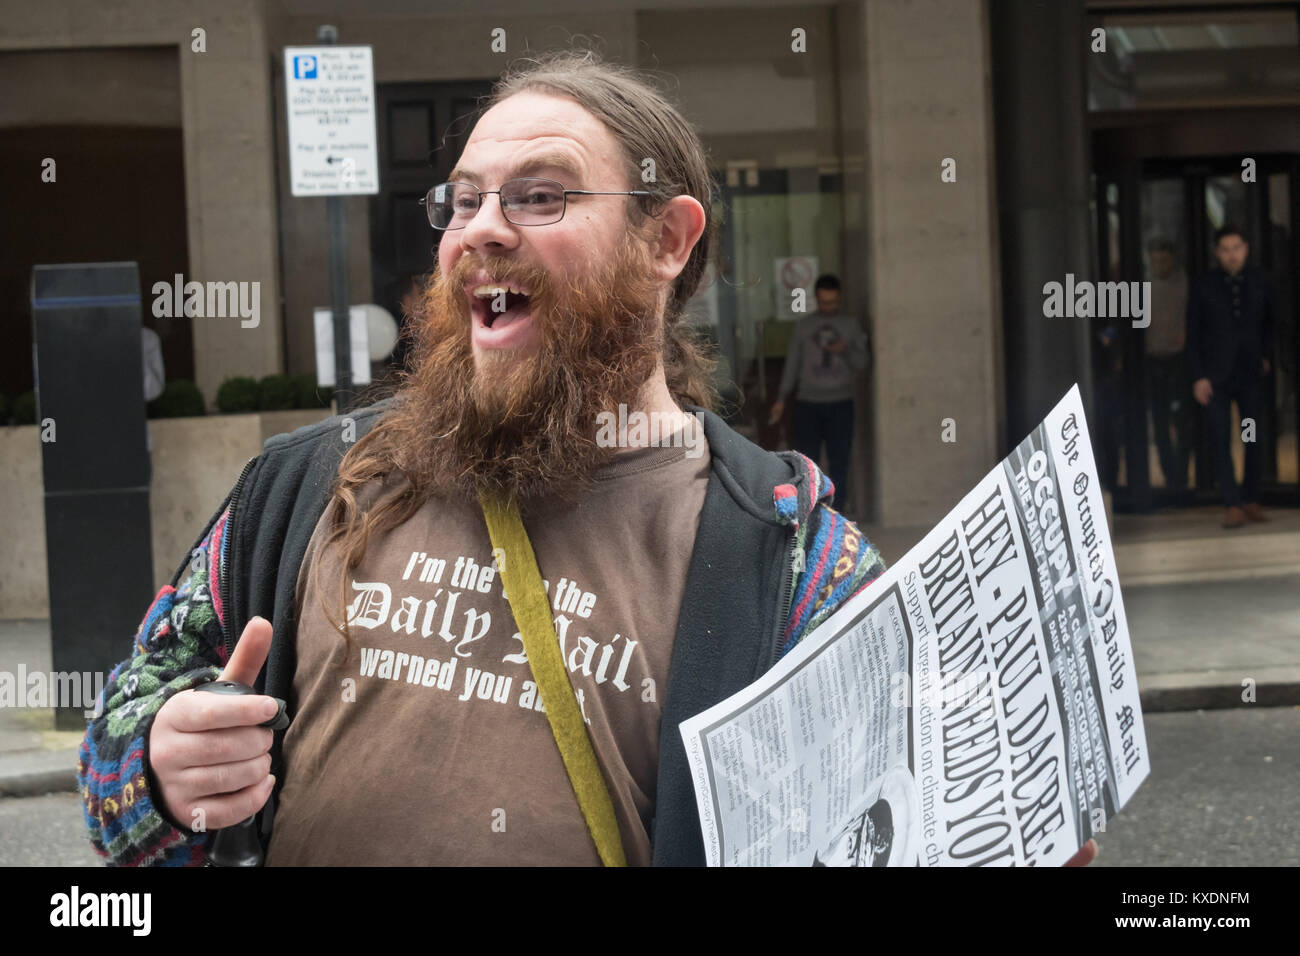 'I'm the one the Daily Mail warned you about' stated the t-shirt at the 48 hour protest by Occupy aimed at getting the Daily Mail to end its support for fossil fuels and climate deniers and to support policies which mitigate climate change. Stock Photo